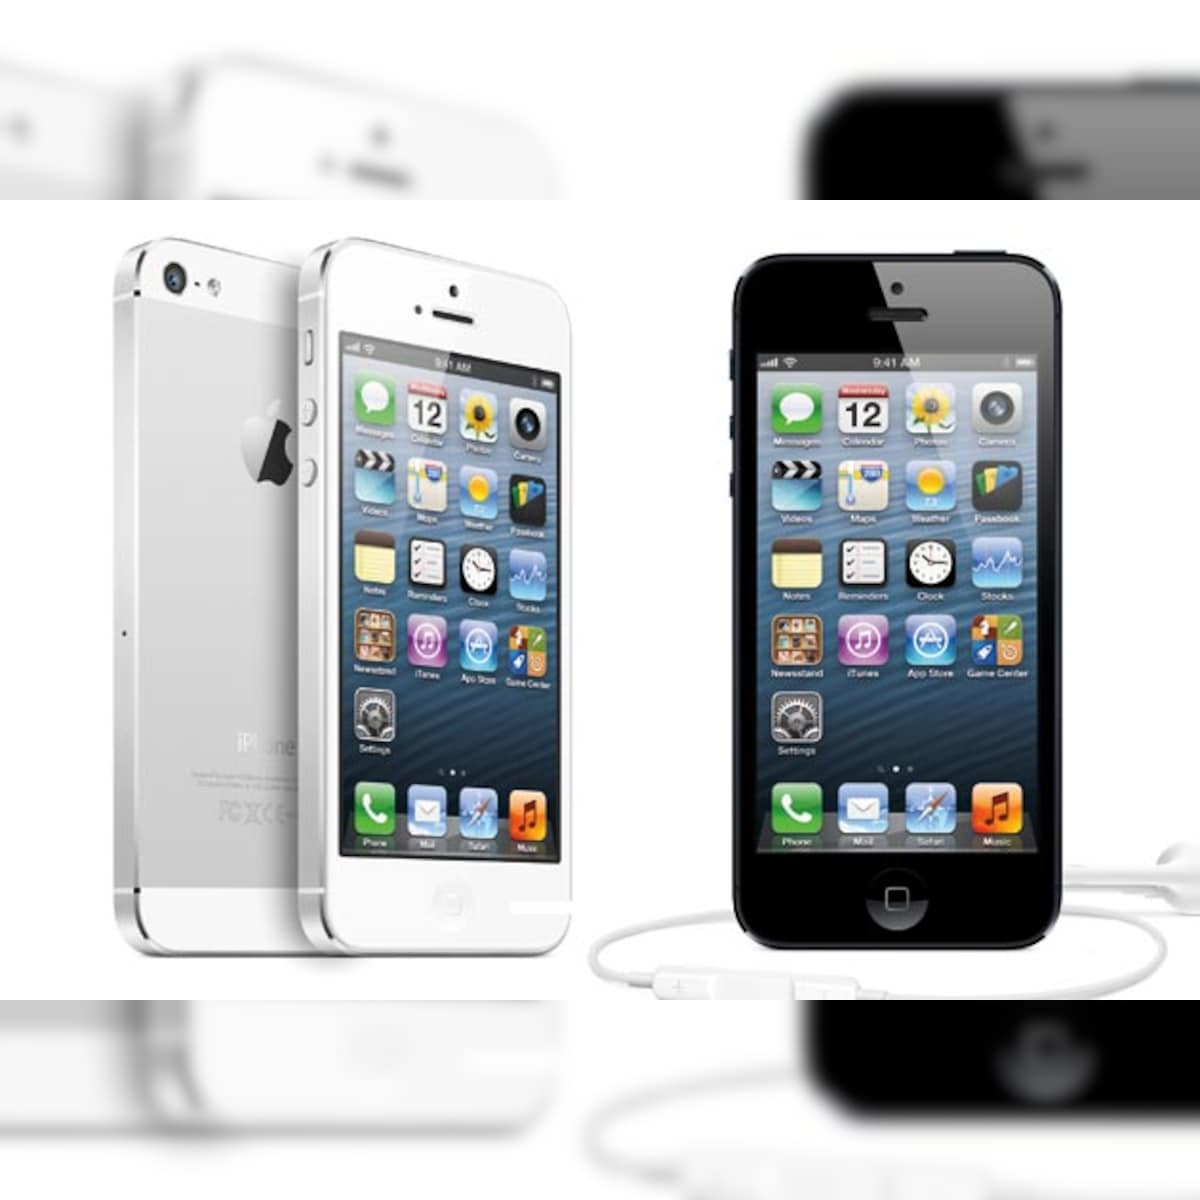 Deens Brandweerman Ploeg Will you pay Rs 1.2 lakh to own an iPhone 5?